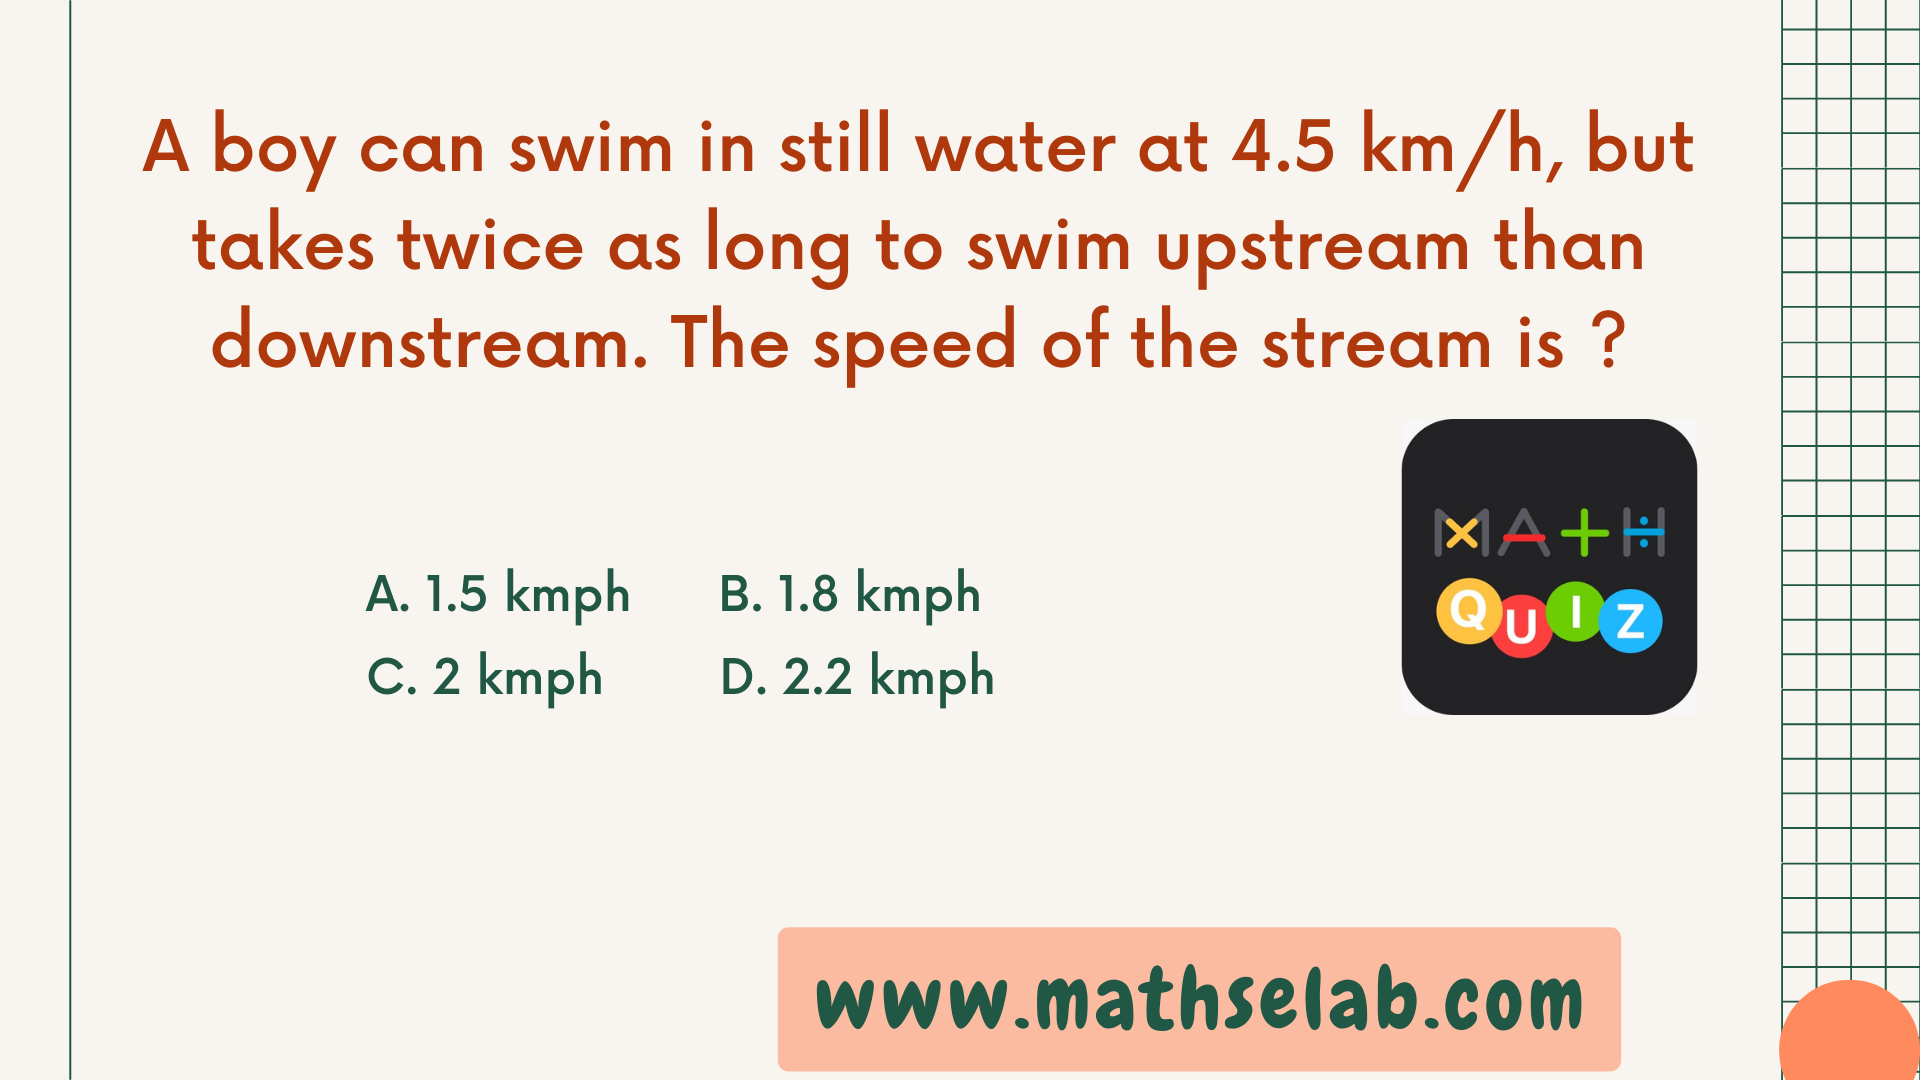 A boy can swim in still water at 4.5 km/h, but takes twice as long to swim upstream than downstream. The speed of the stream is ?